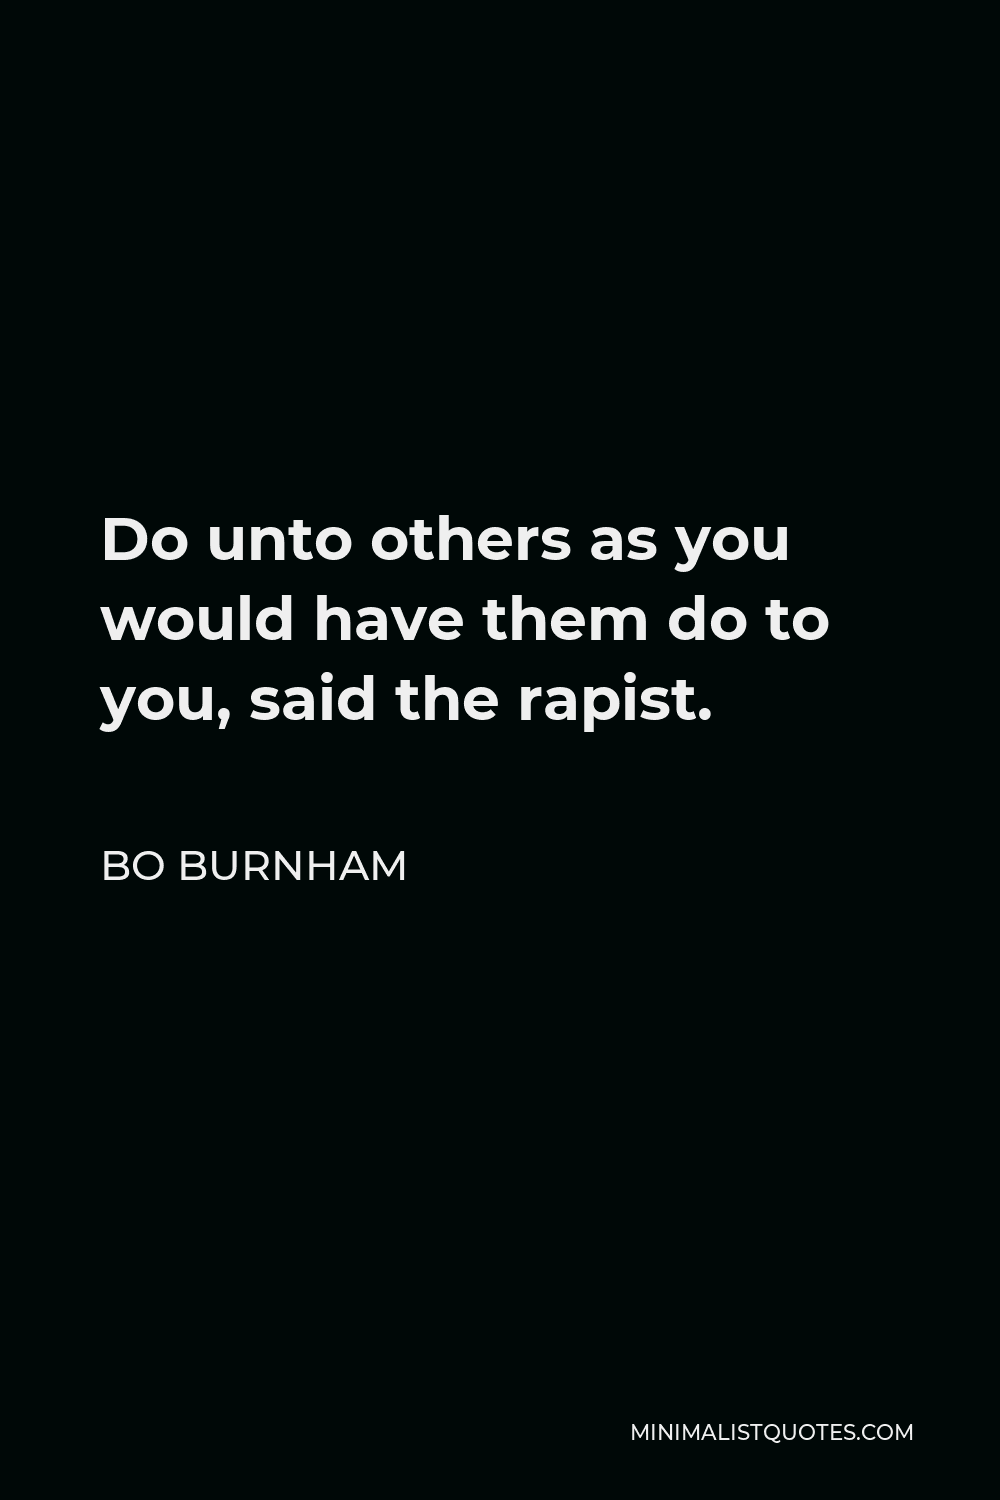 Bo Burnham Quote - Do unto others as you would have them do to you, said the rapist.